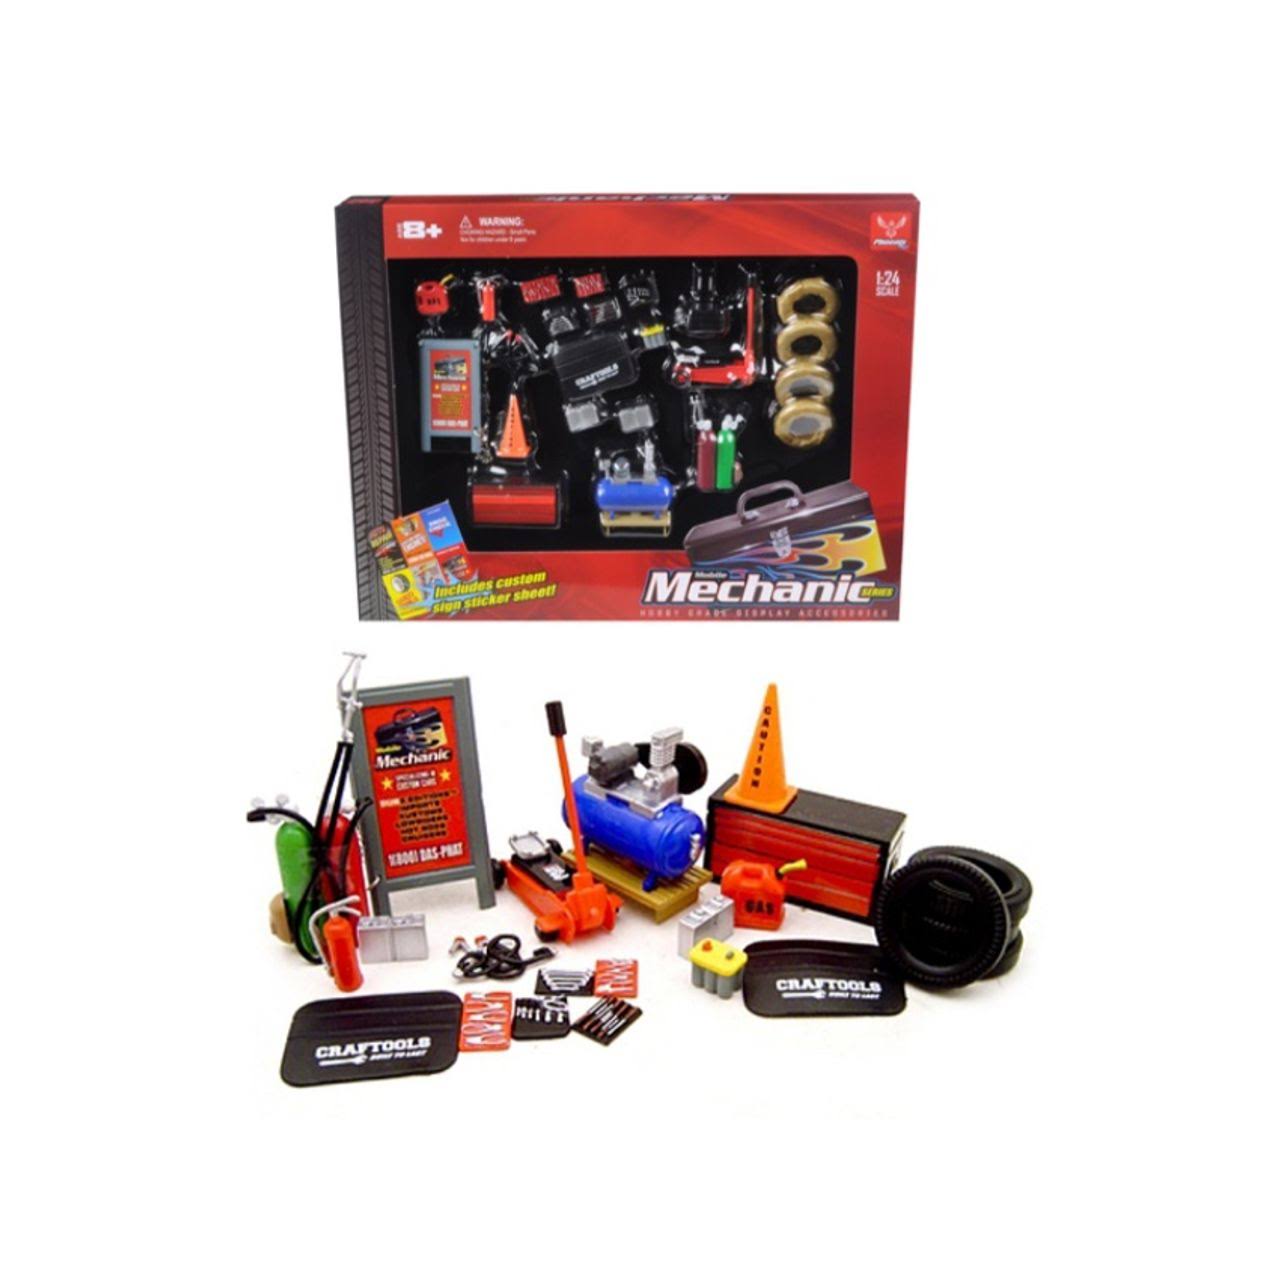 Mechanic Accessories Set Hobby Gear G Model Train and Car Accessories - 1:24 Scale